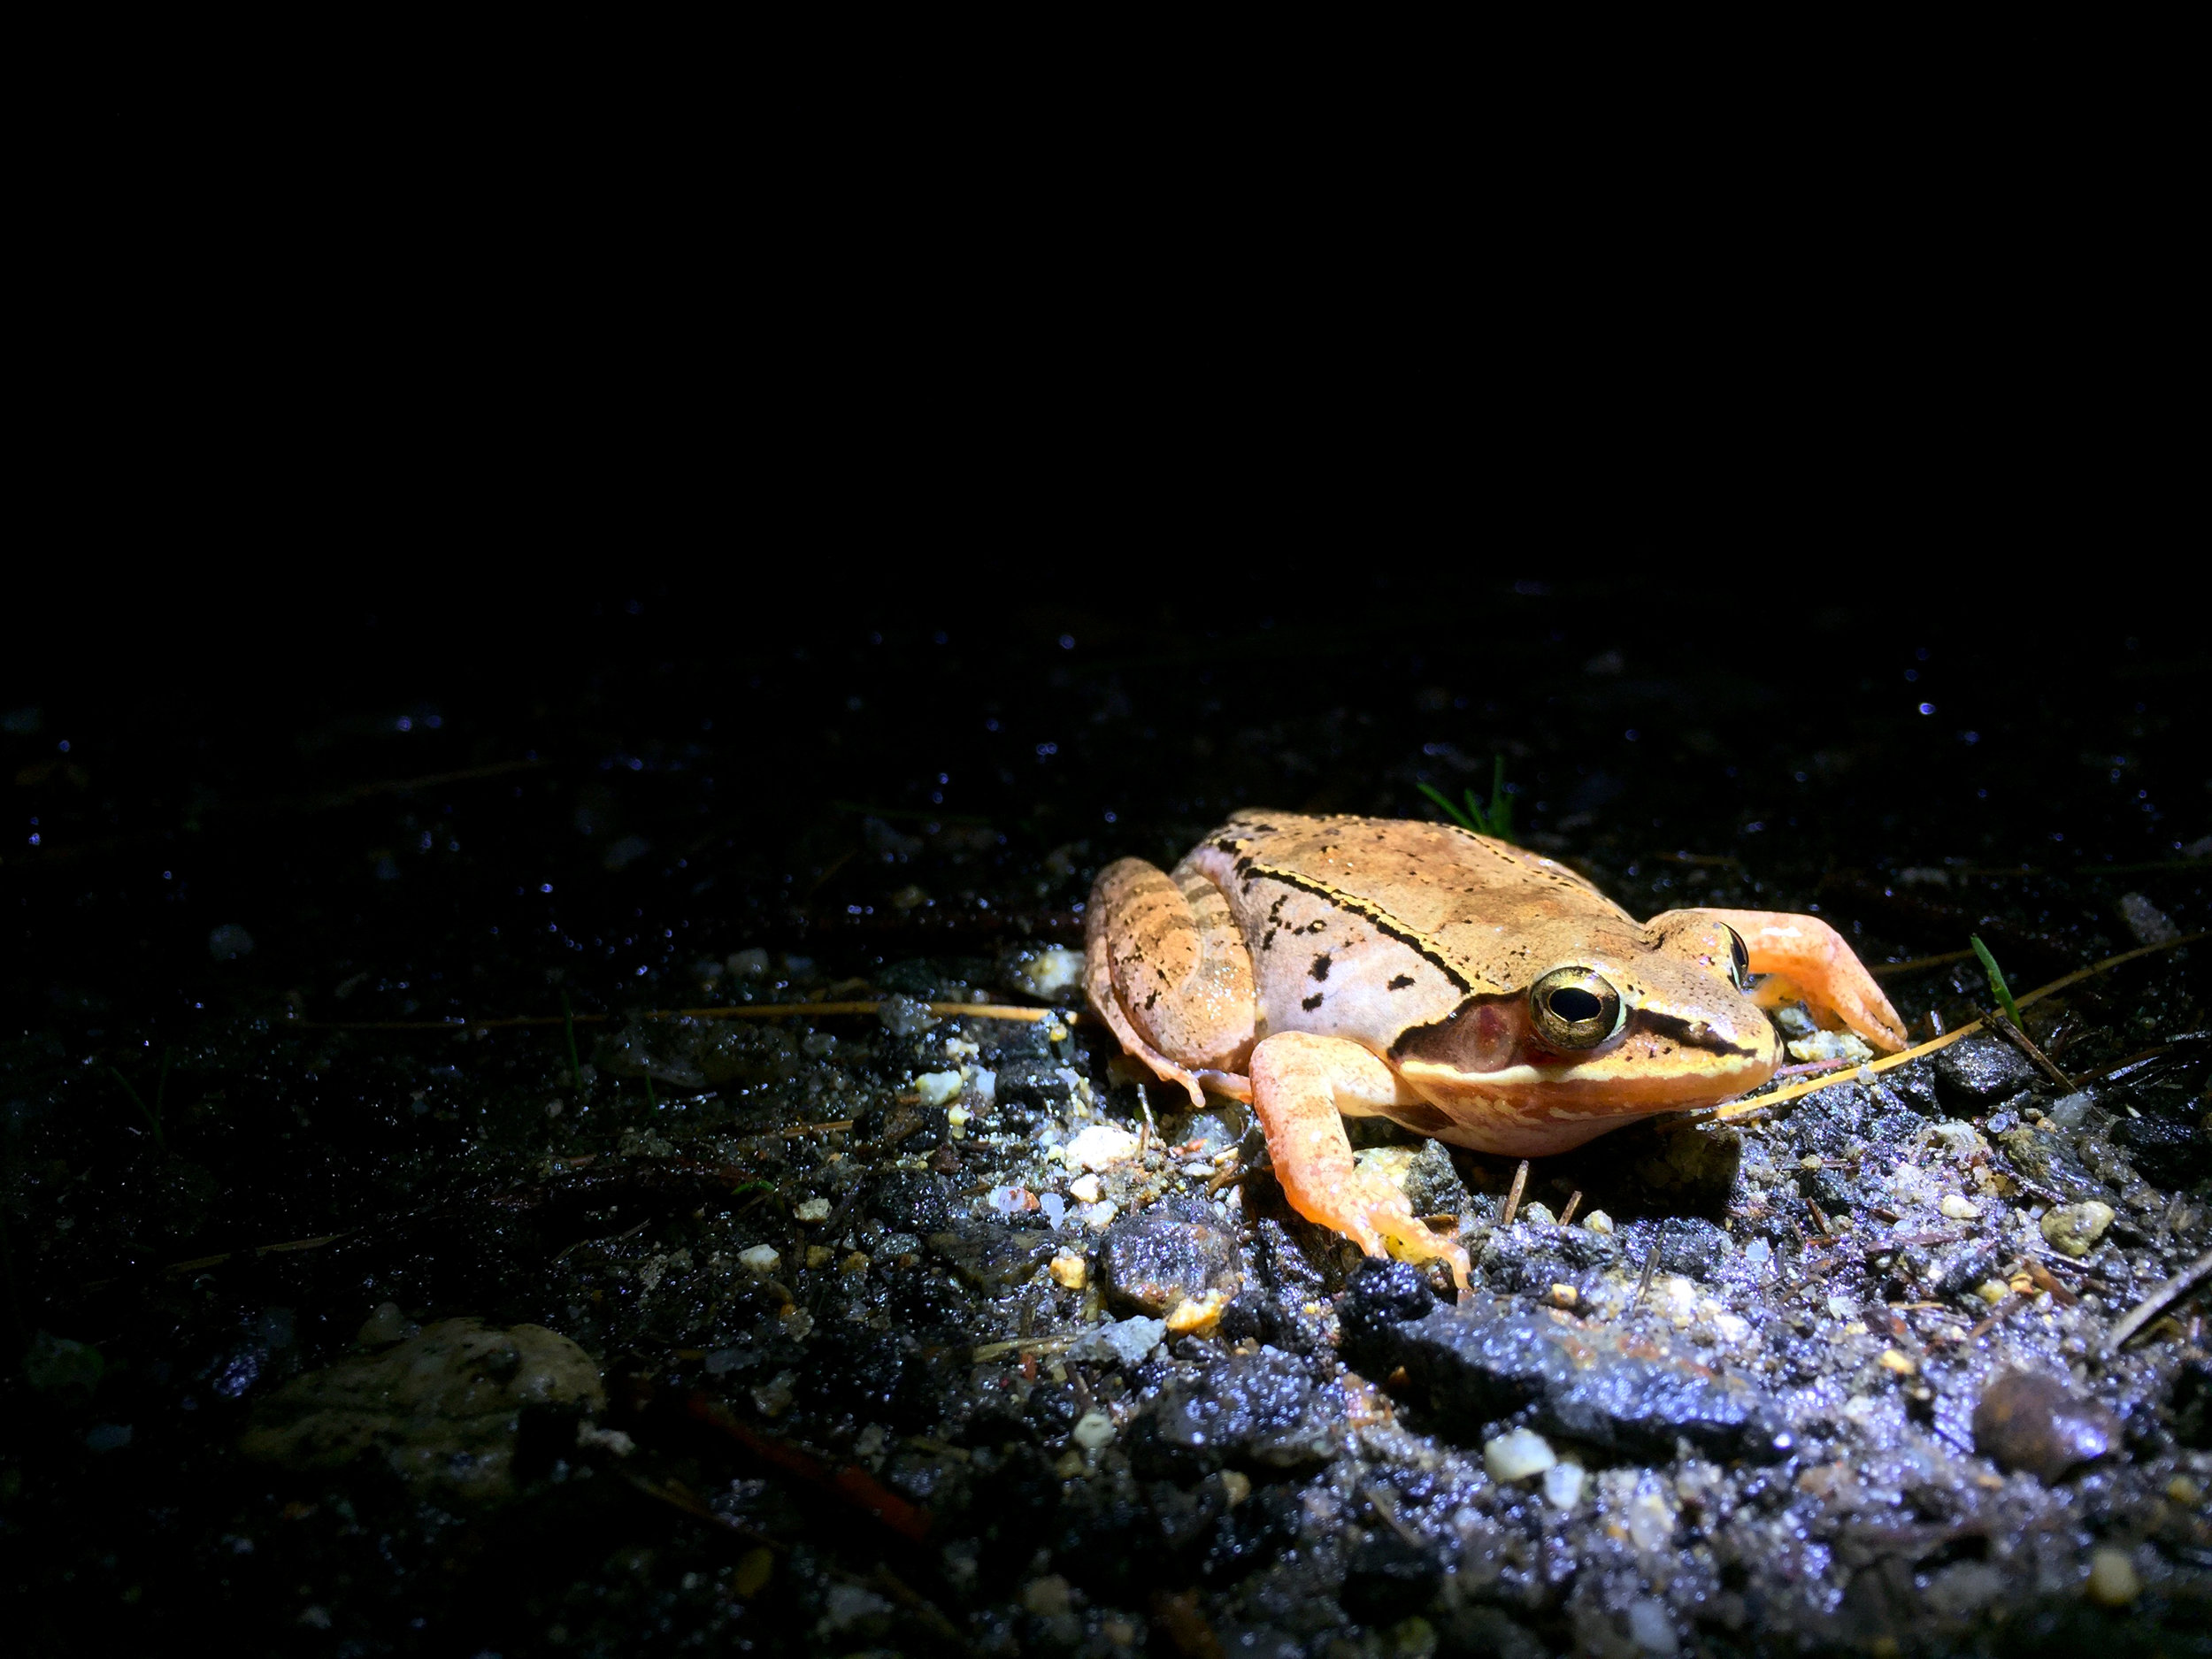  A wood frog is revealed in the beam of a volunteer's flashlight as he/she leaves the safety of the wetland and attempts to cross the road. (Anna Miller/Animalia Podcast) 